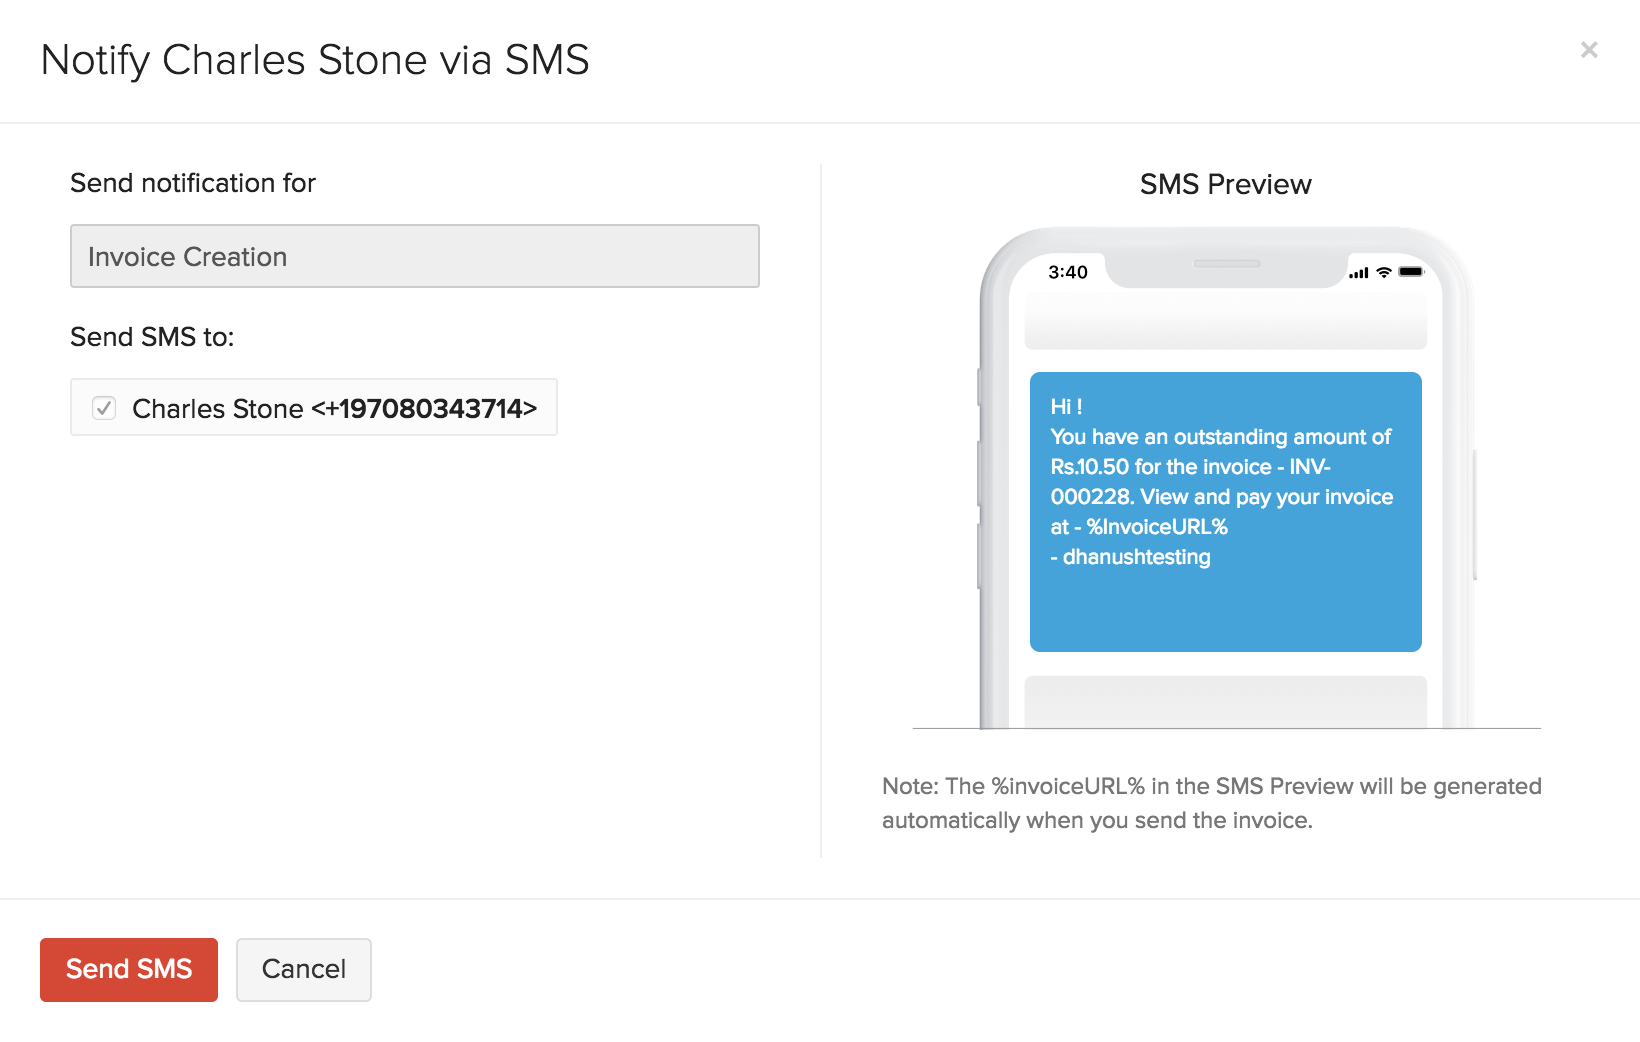 Preview SMS Notification